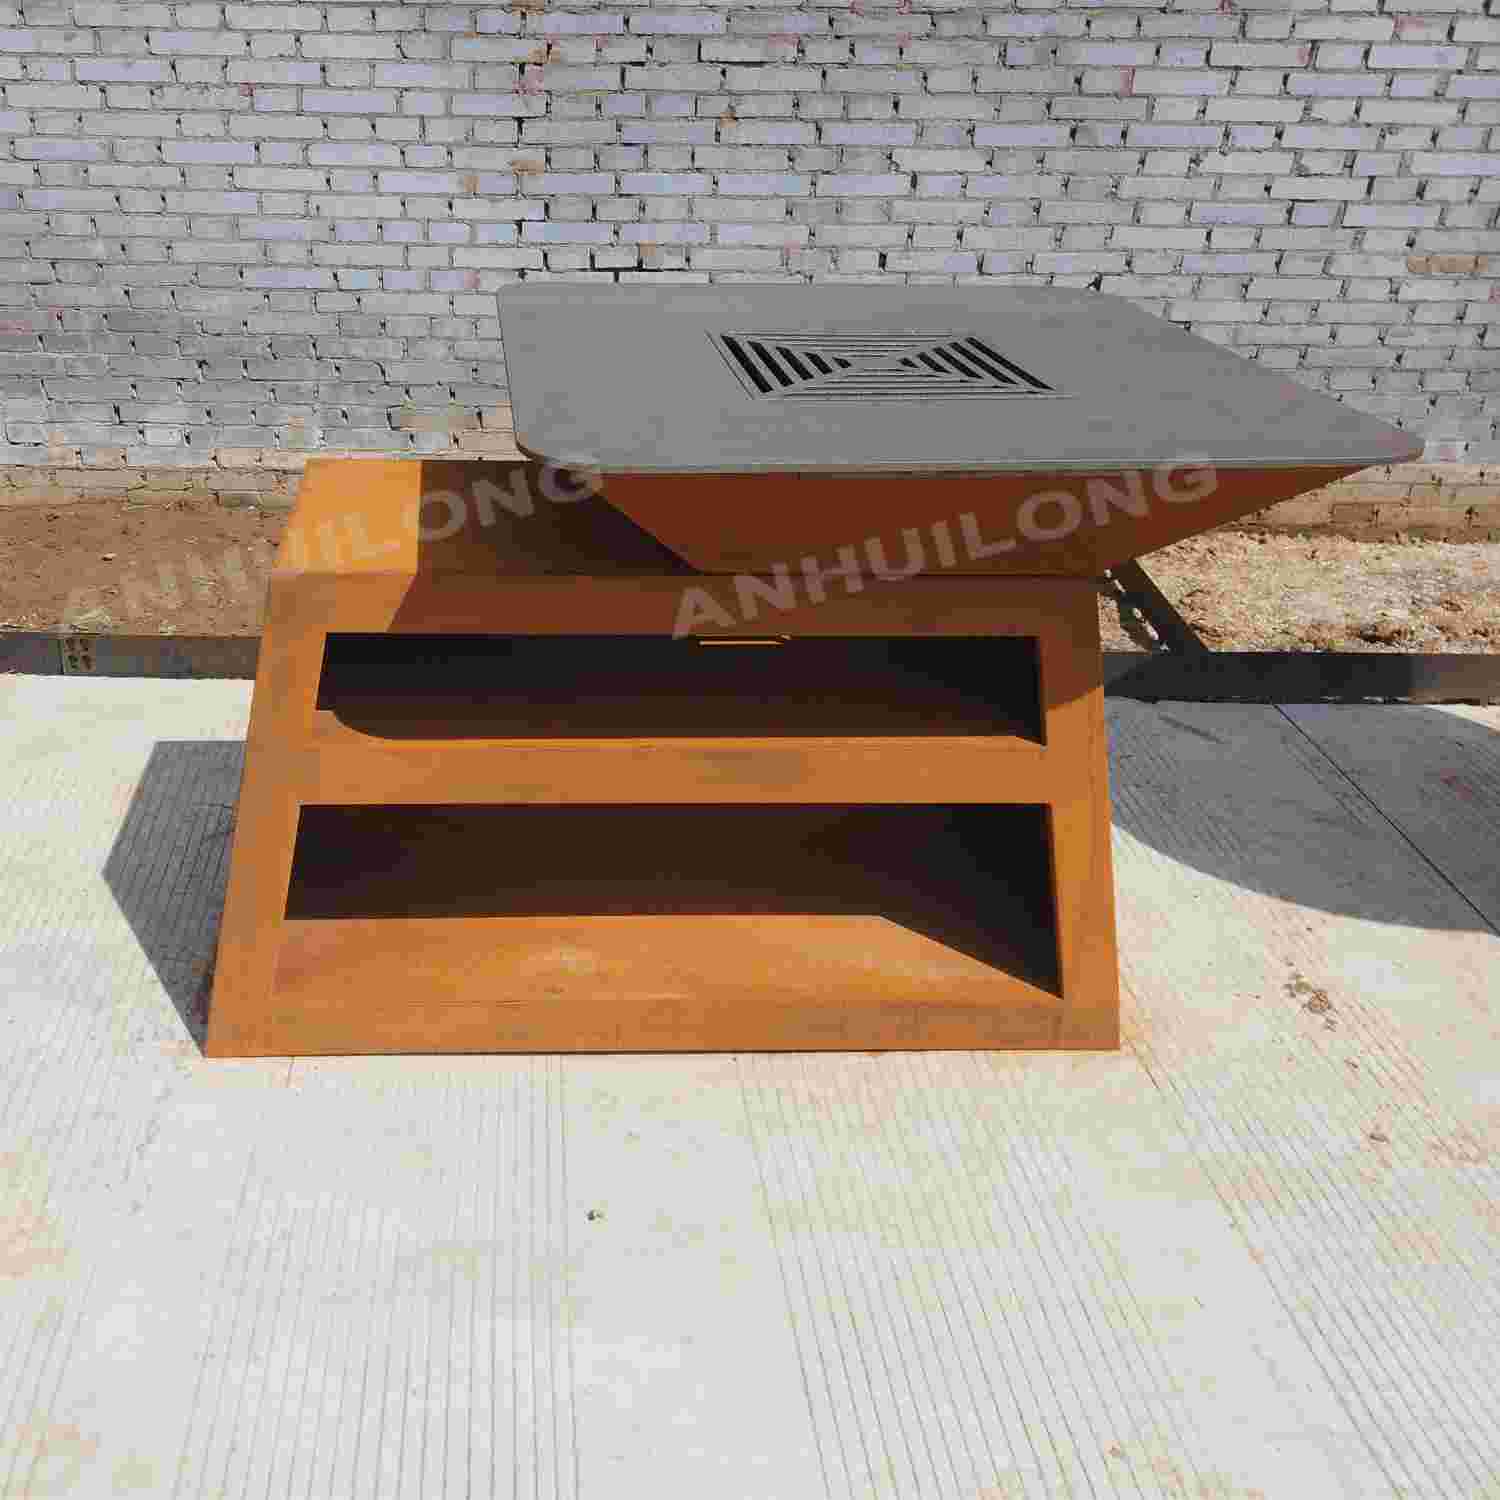 User-friendly corten steel BBQ grill with removable center